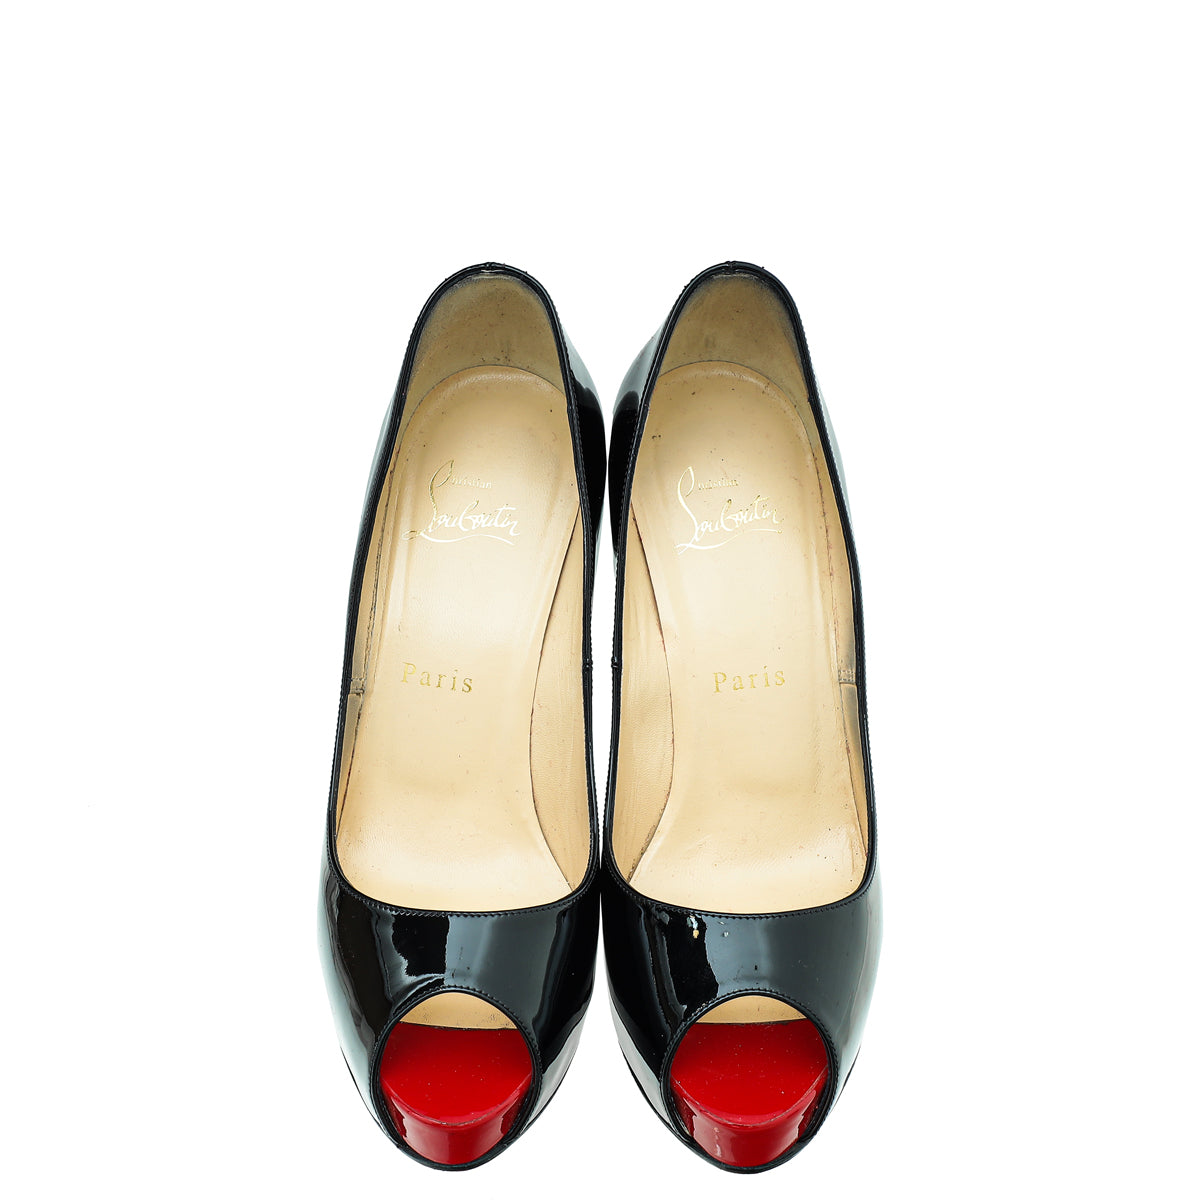 Christian Louboutin Bicolor New Very Prive 120 Pumps 37